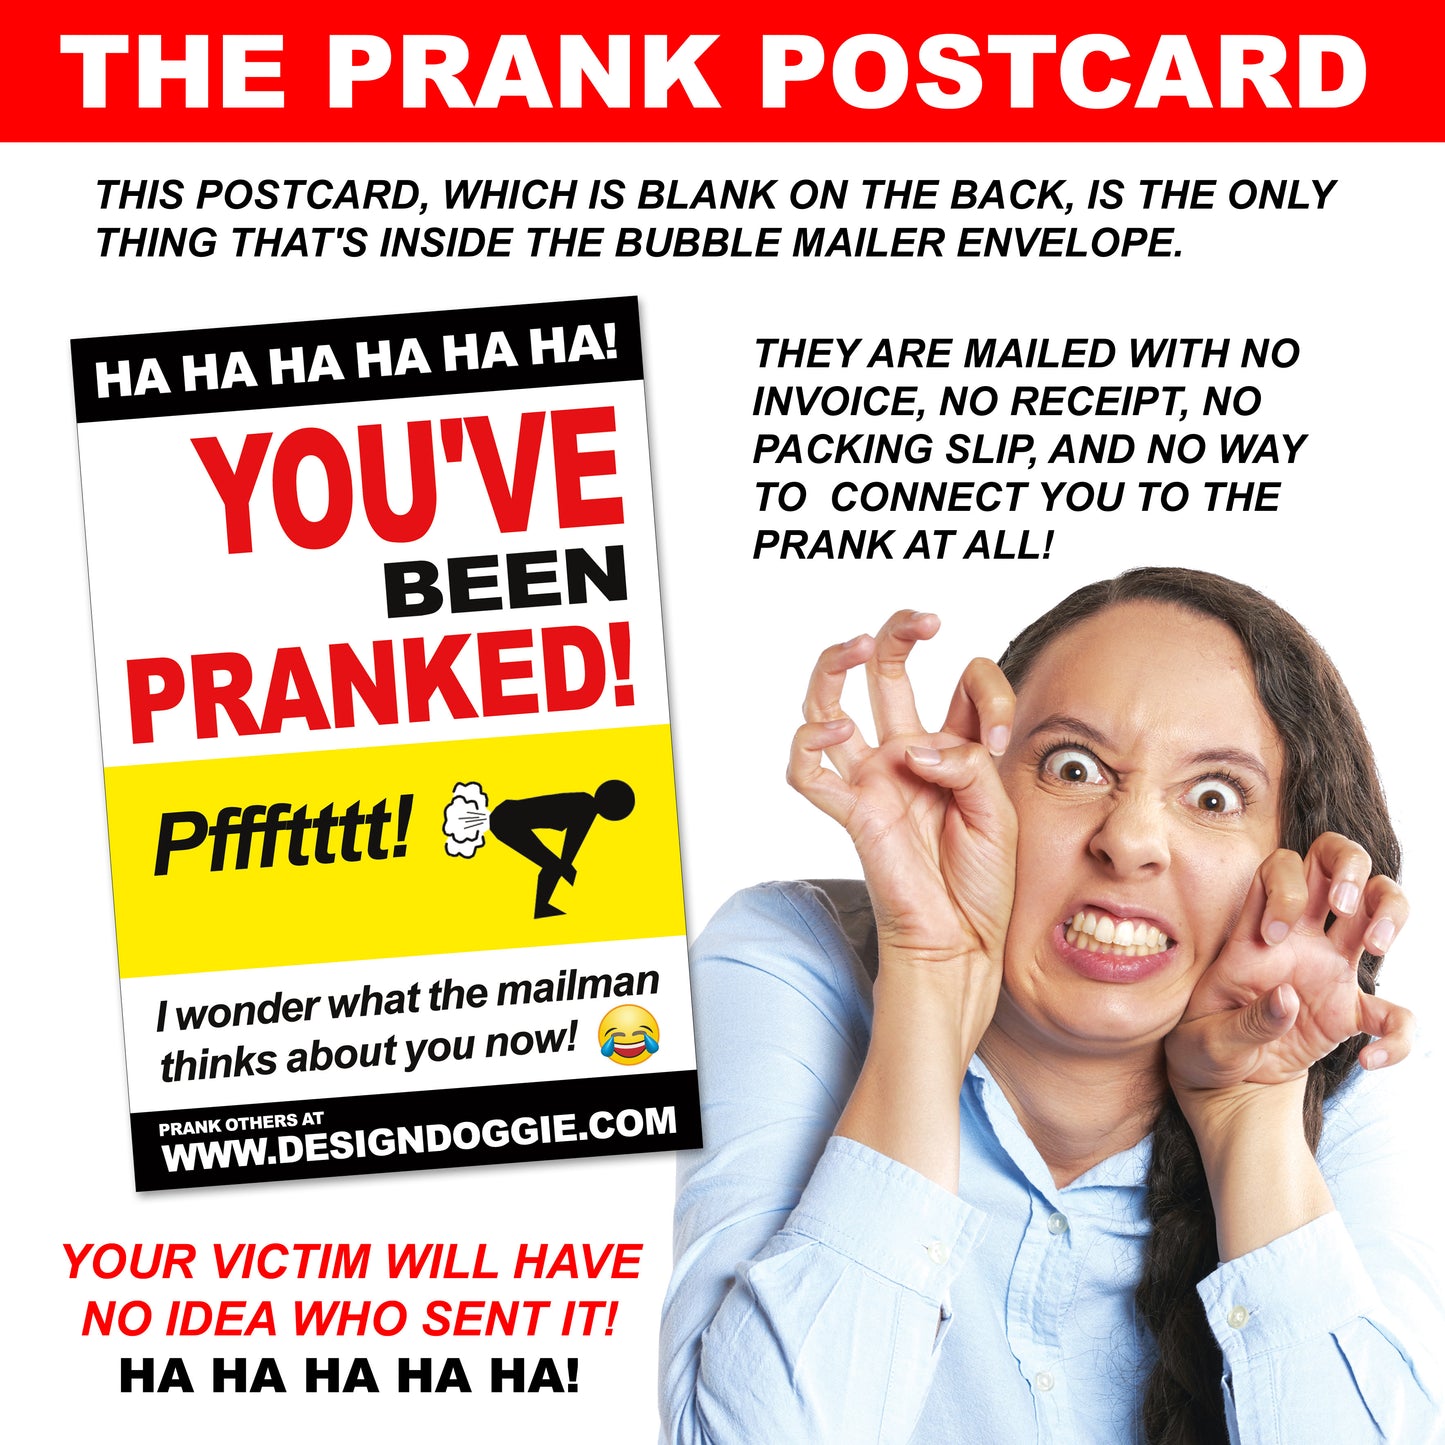 Inmate Donate embarrassing prank envelope gets mailed directly to your victims 100% anonymously!